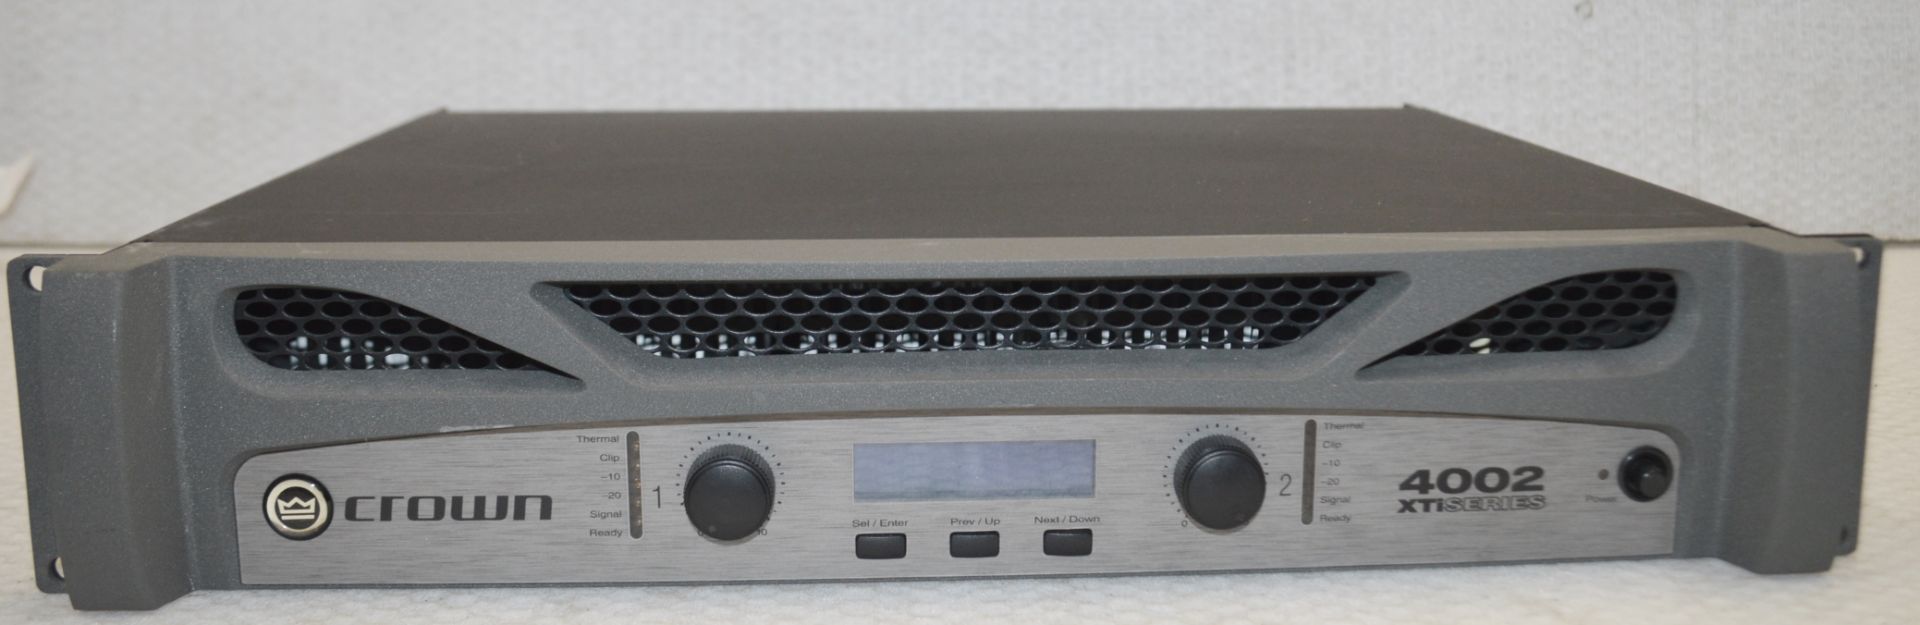 1 x Crown XTi 4002 Two-channel 1200W Power Amplifier - RRP £875 - Recently Removed From A Commercial